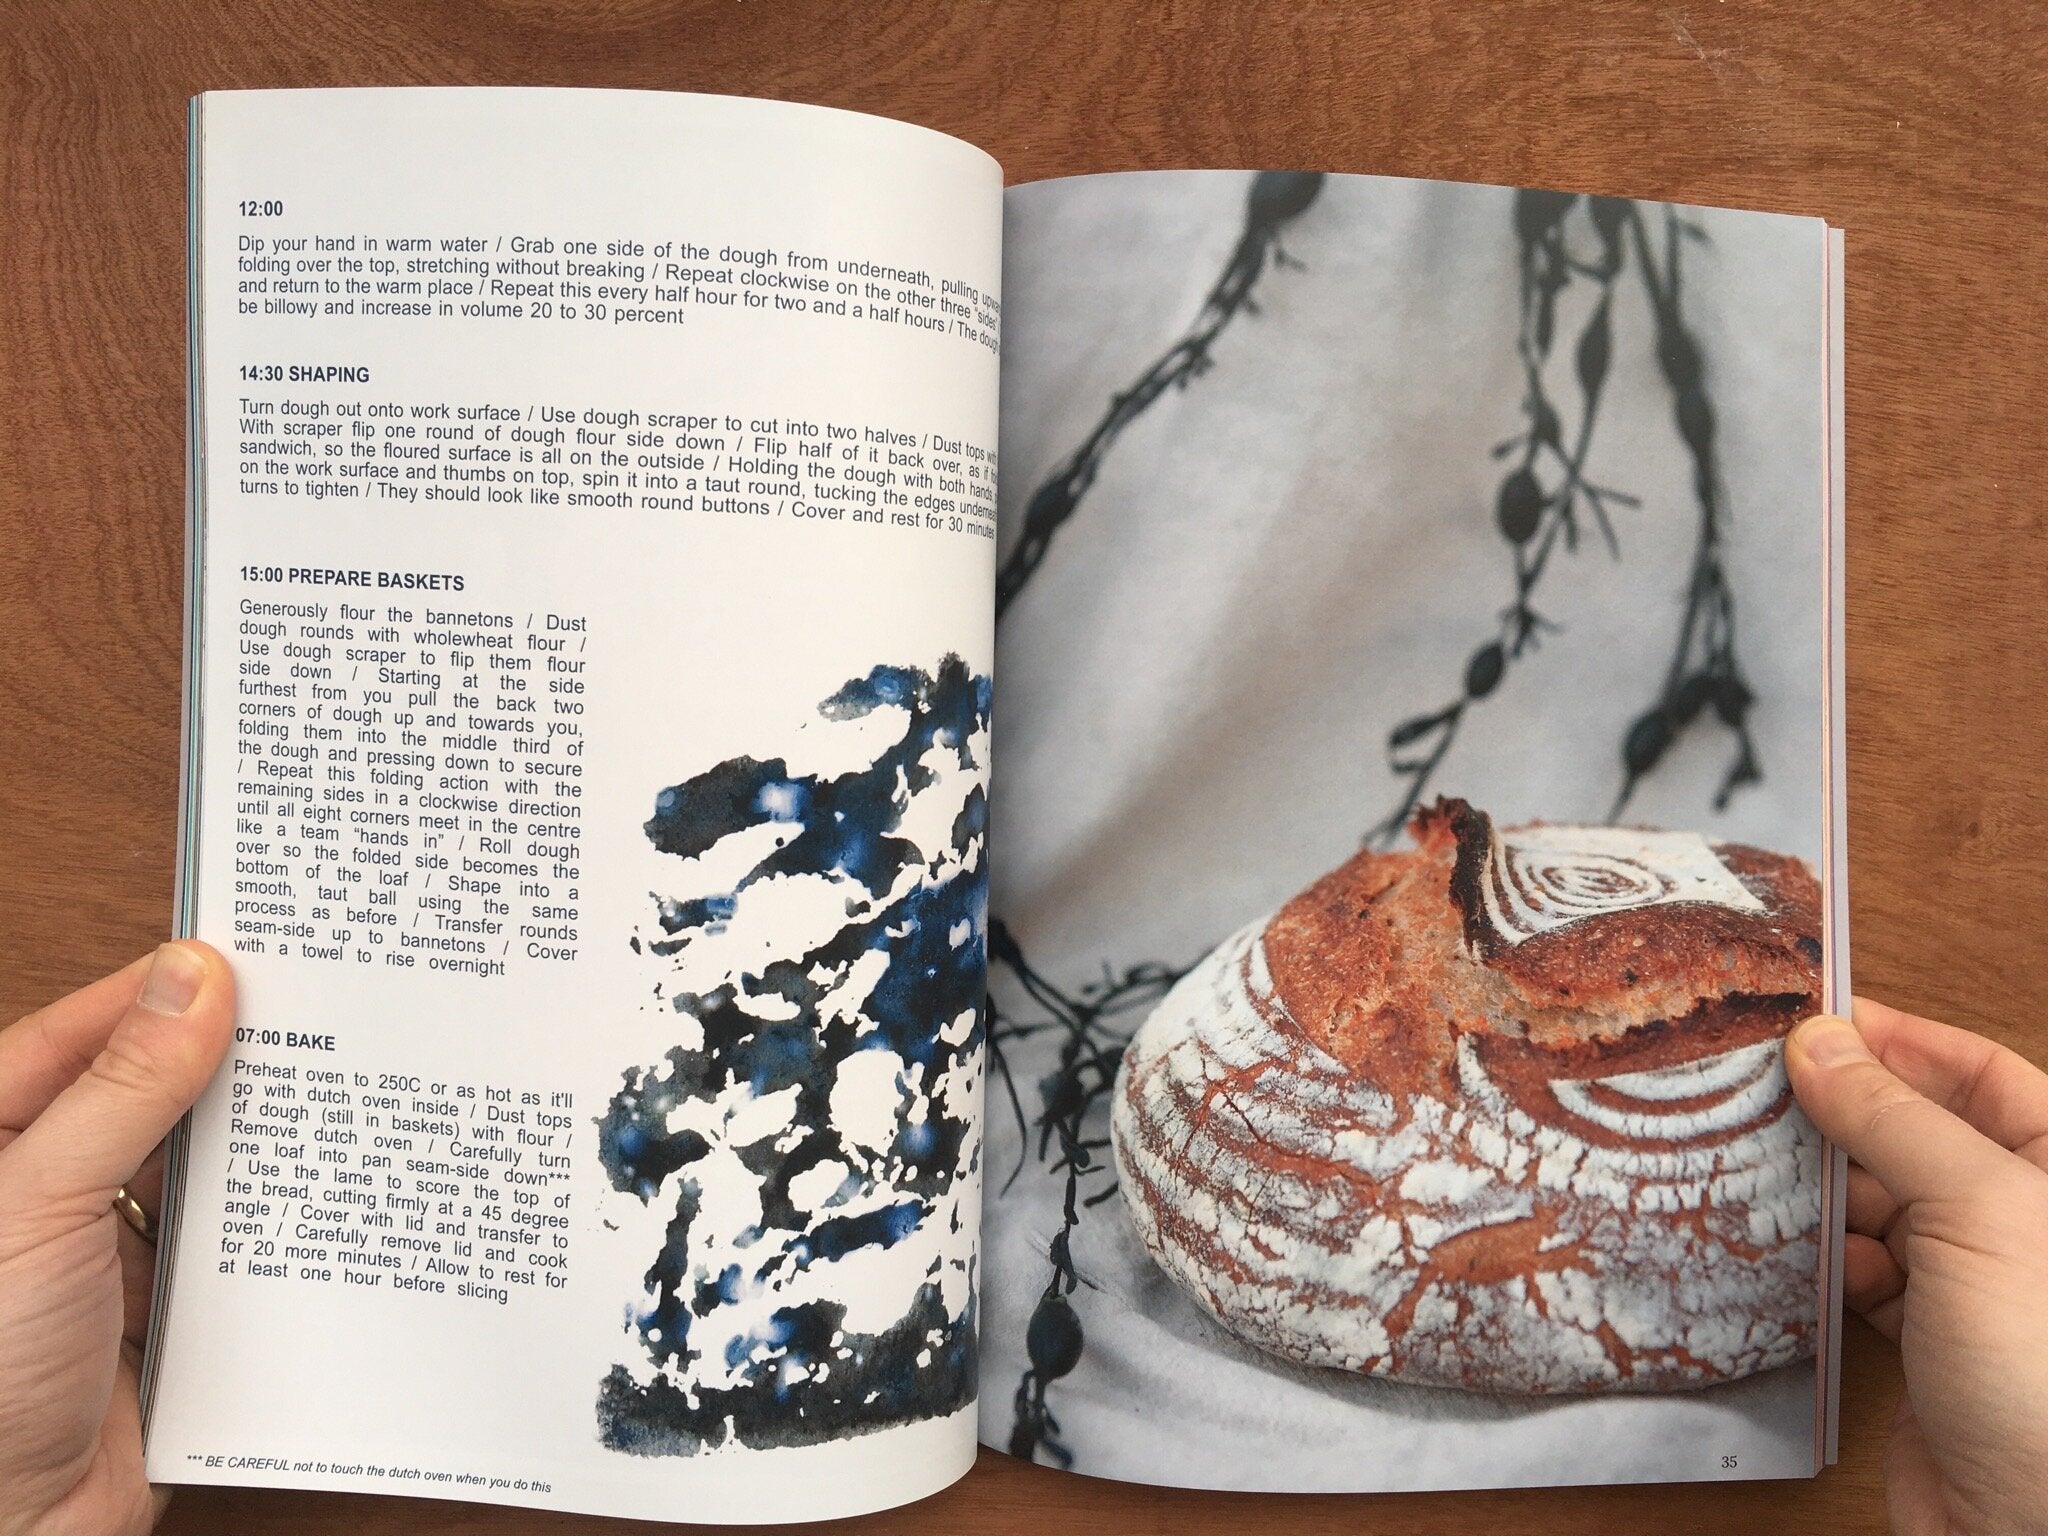 MAKE BAKE COOK BOOK: A COLLECTION OF ARTISTS' WORKS AND RECIPES